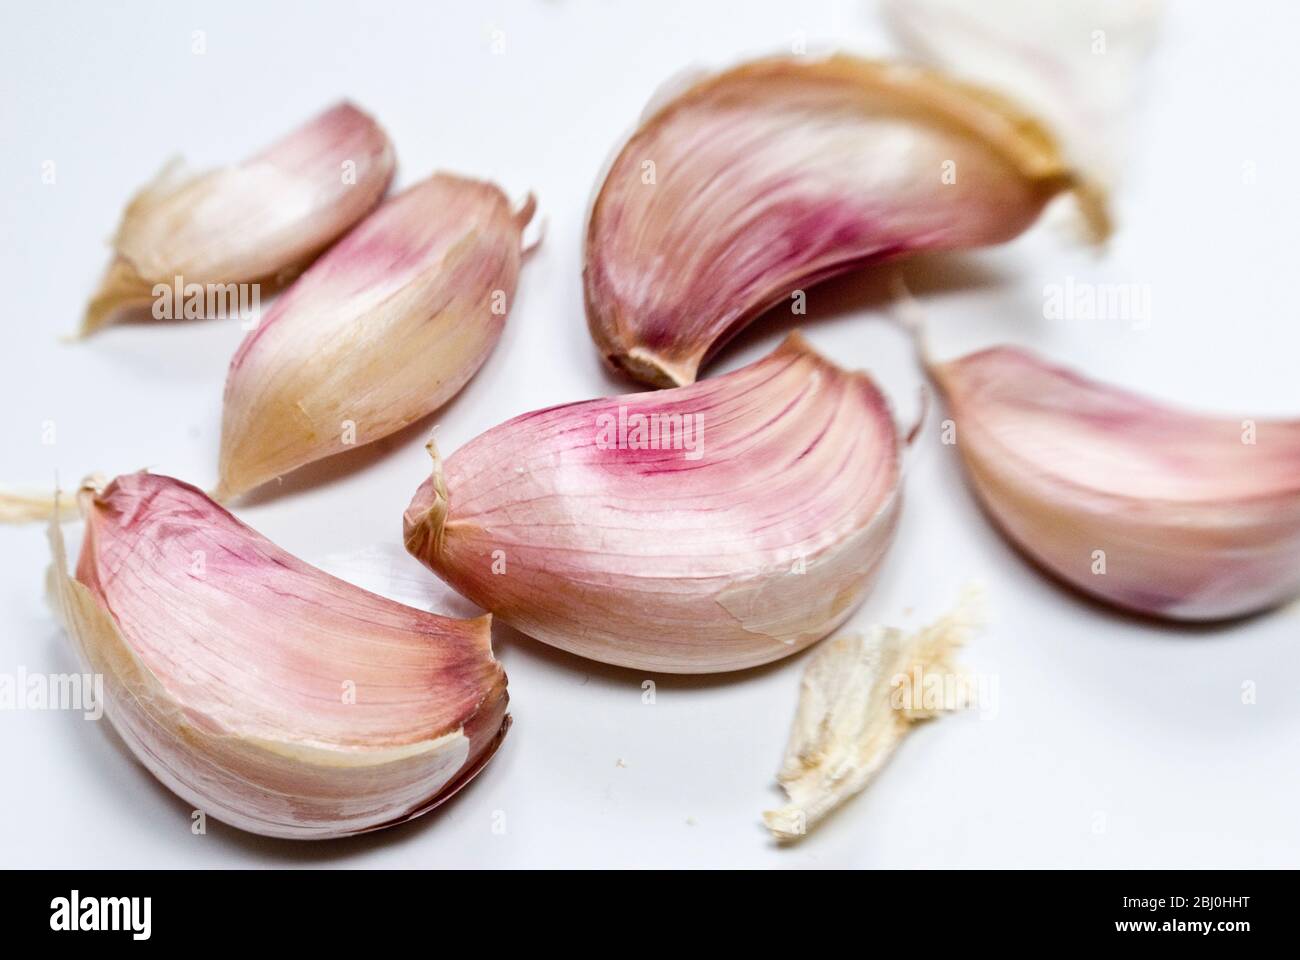 Cloves of garlic in their papery pink and white skins - Stock Photo